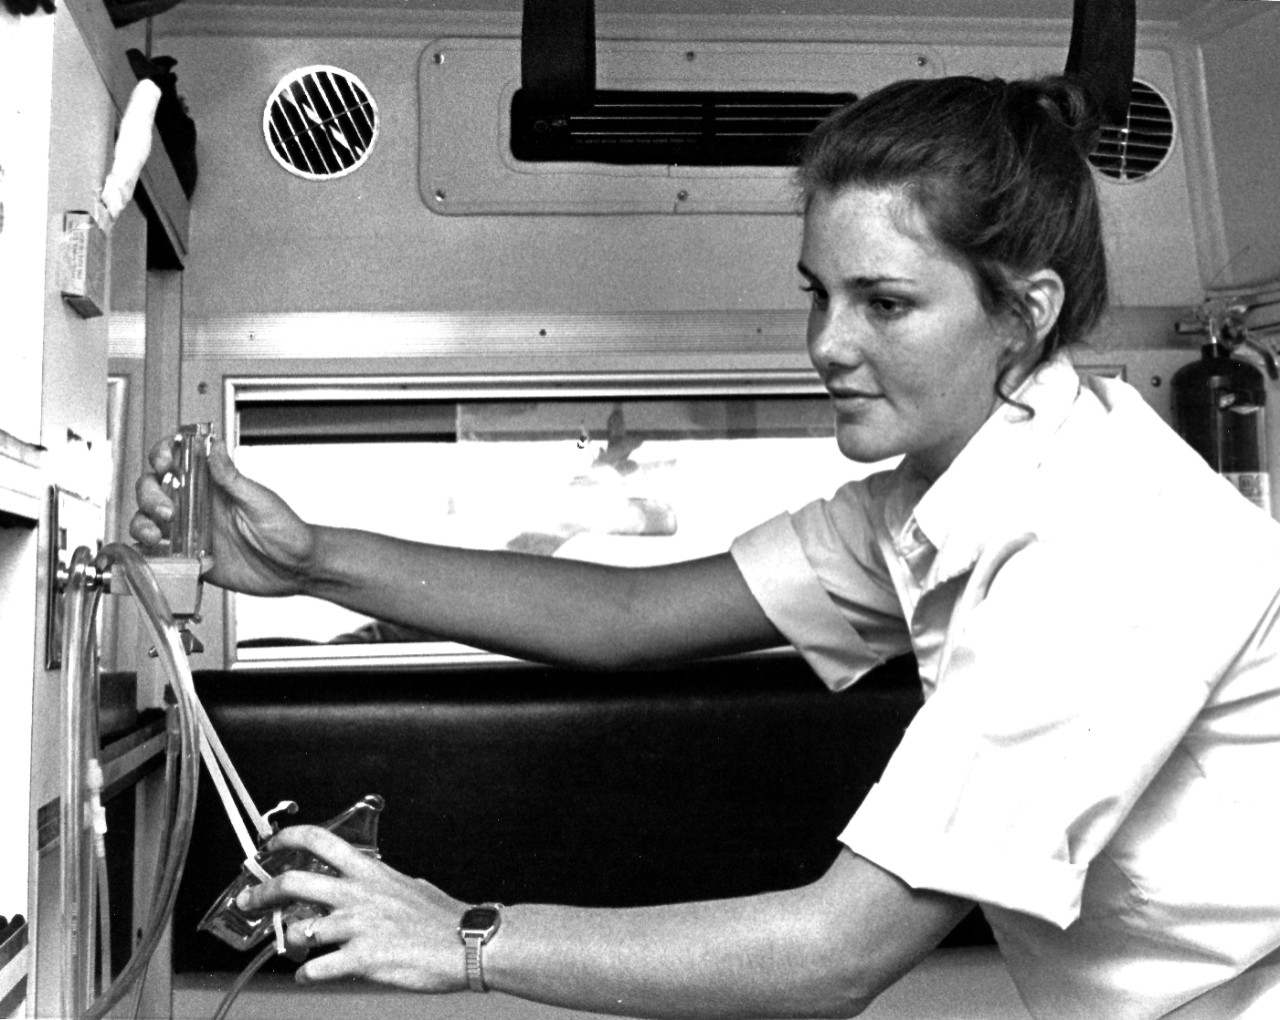 330-CFD-DN-SN-84-01318:   Petty Officer Second Class Kathleen Kerr, September 1982.   Kerr, a Hospital Corpsman, checks the oxygen system in one of the U.S. Naval Hospital ambulances, while standing duty as an Emergency Technician.   Photographed by JO1 Glenna Houston, September 1, 1982.   Official U.S. Navy photograph, now in the collections of the National Archives.  